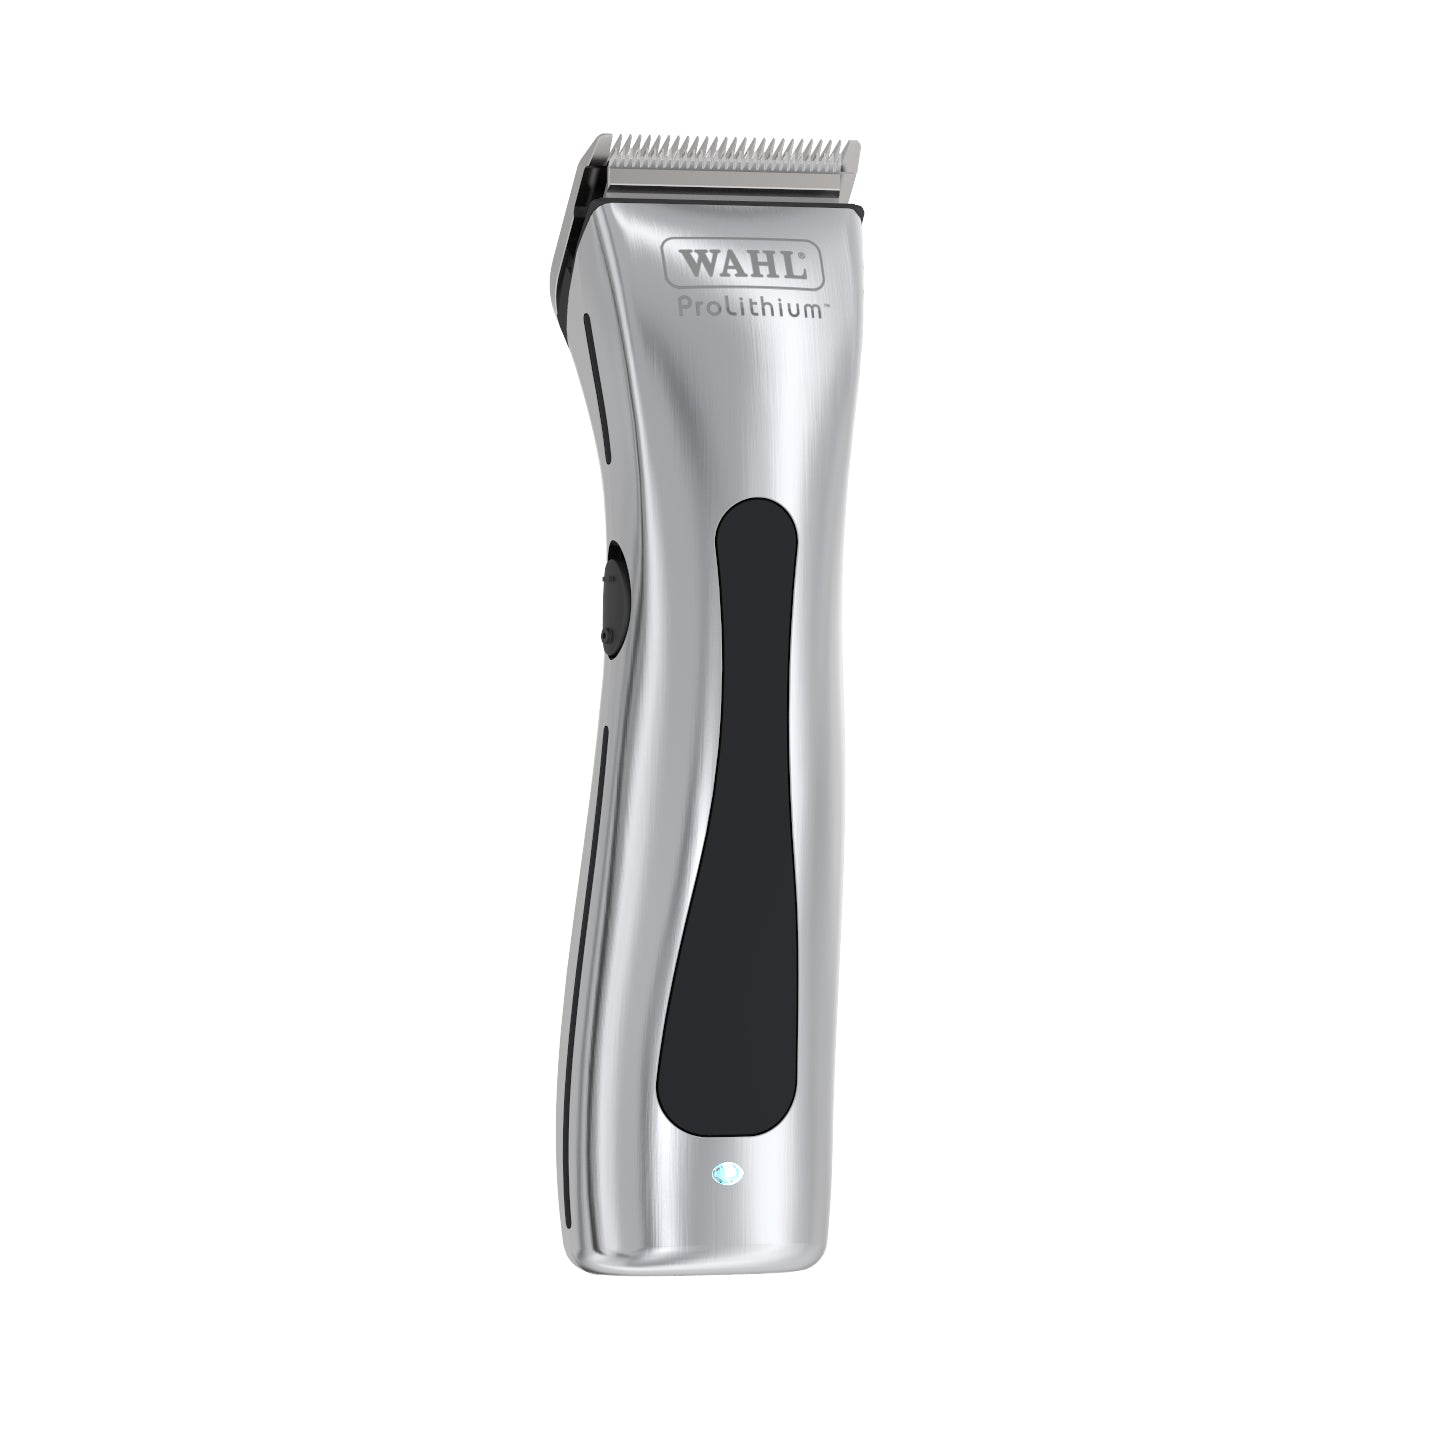 wahl pro lithium beretto